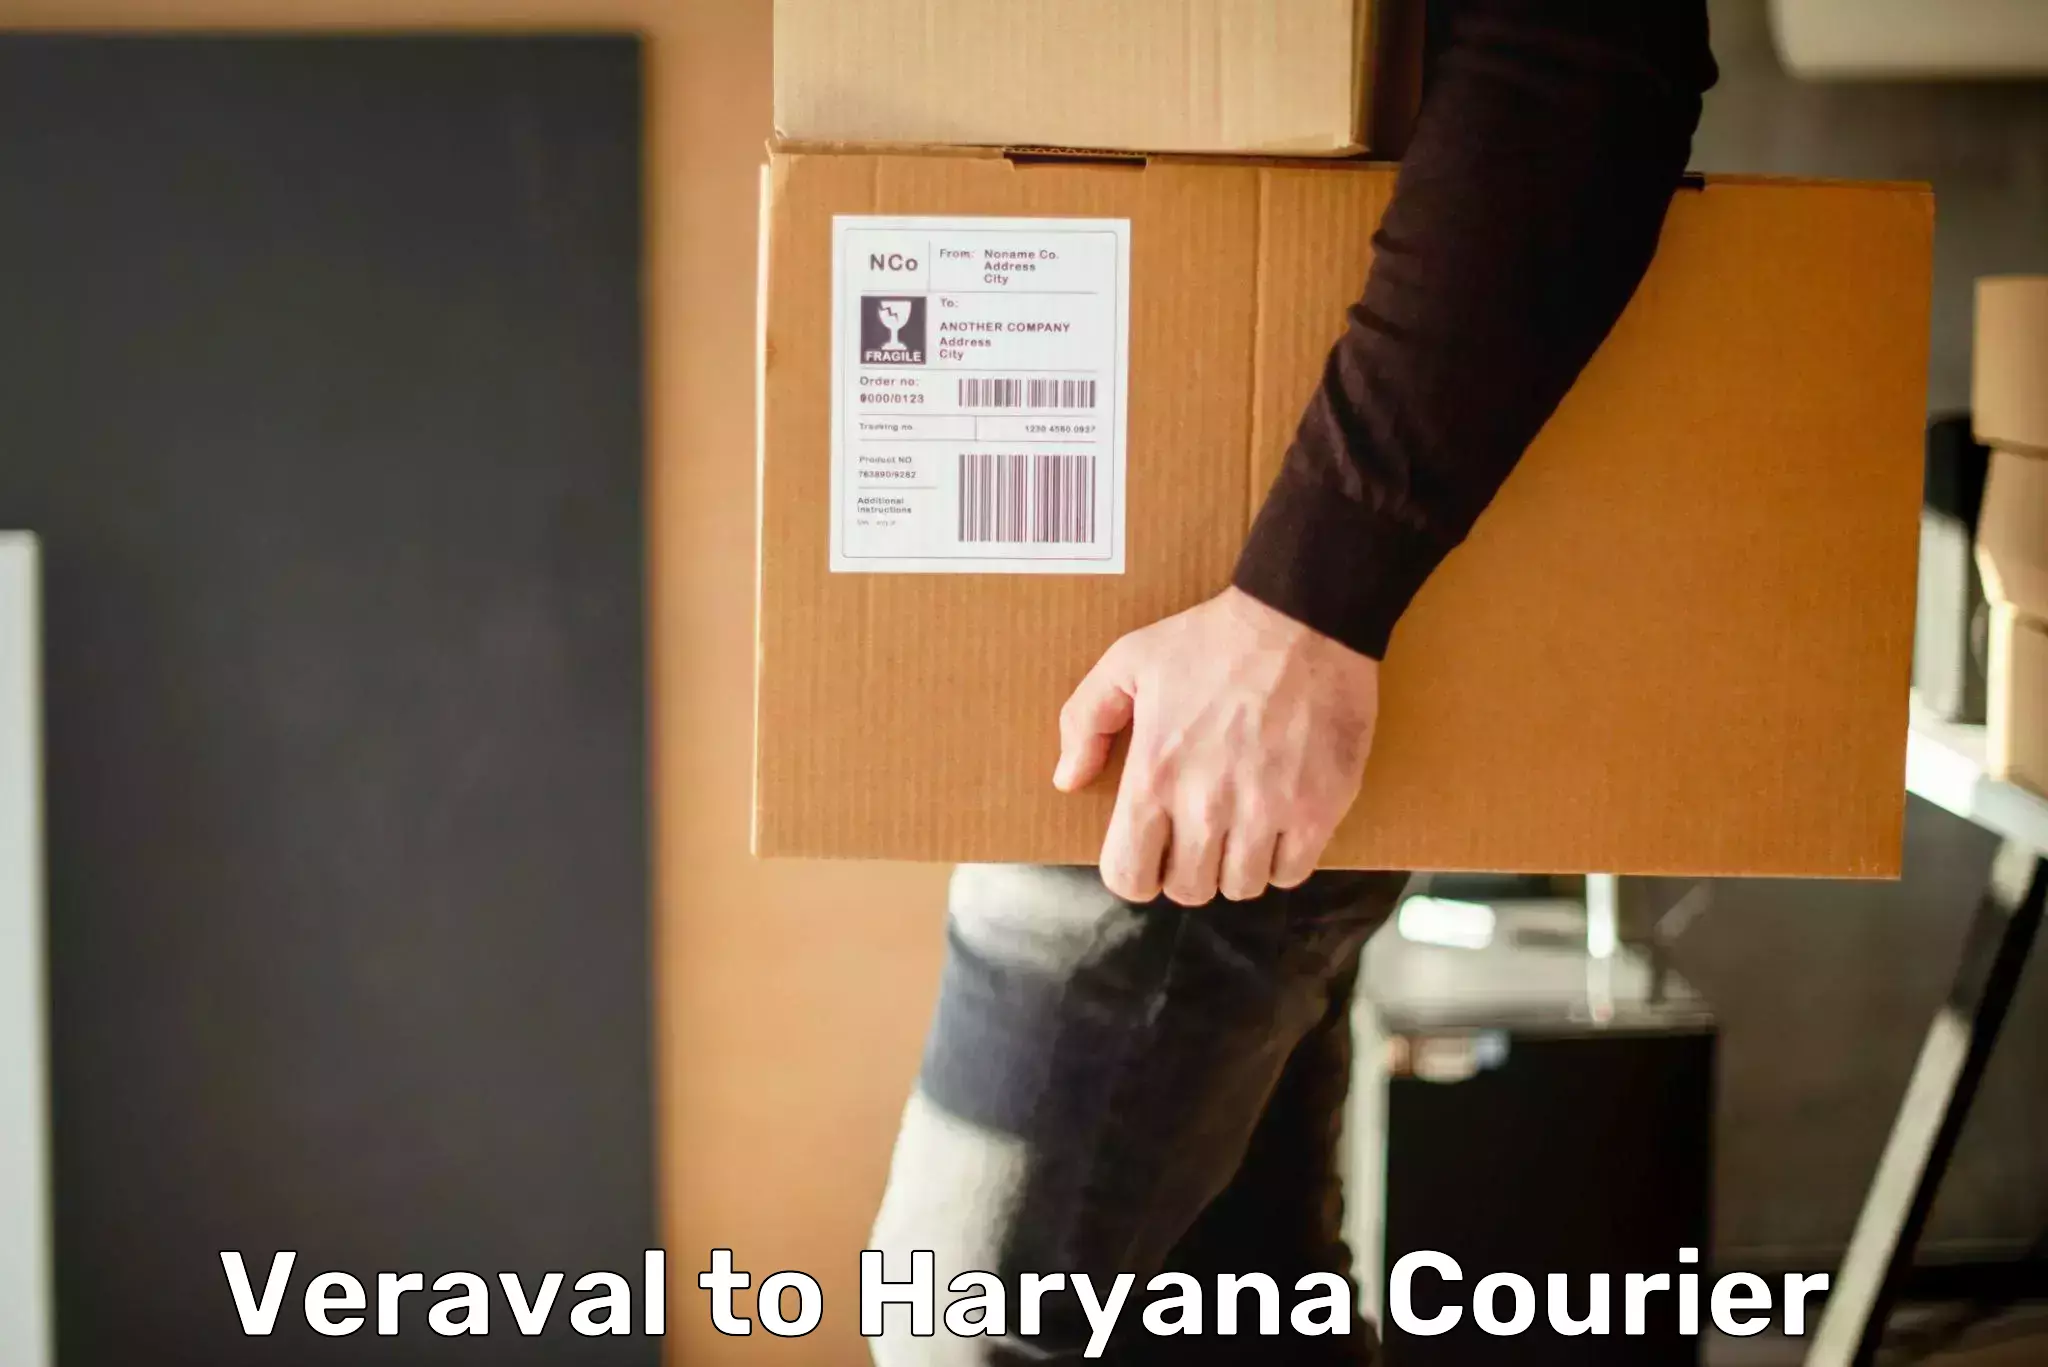 Fast delivery service Veraval to Panchkula